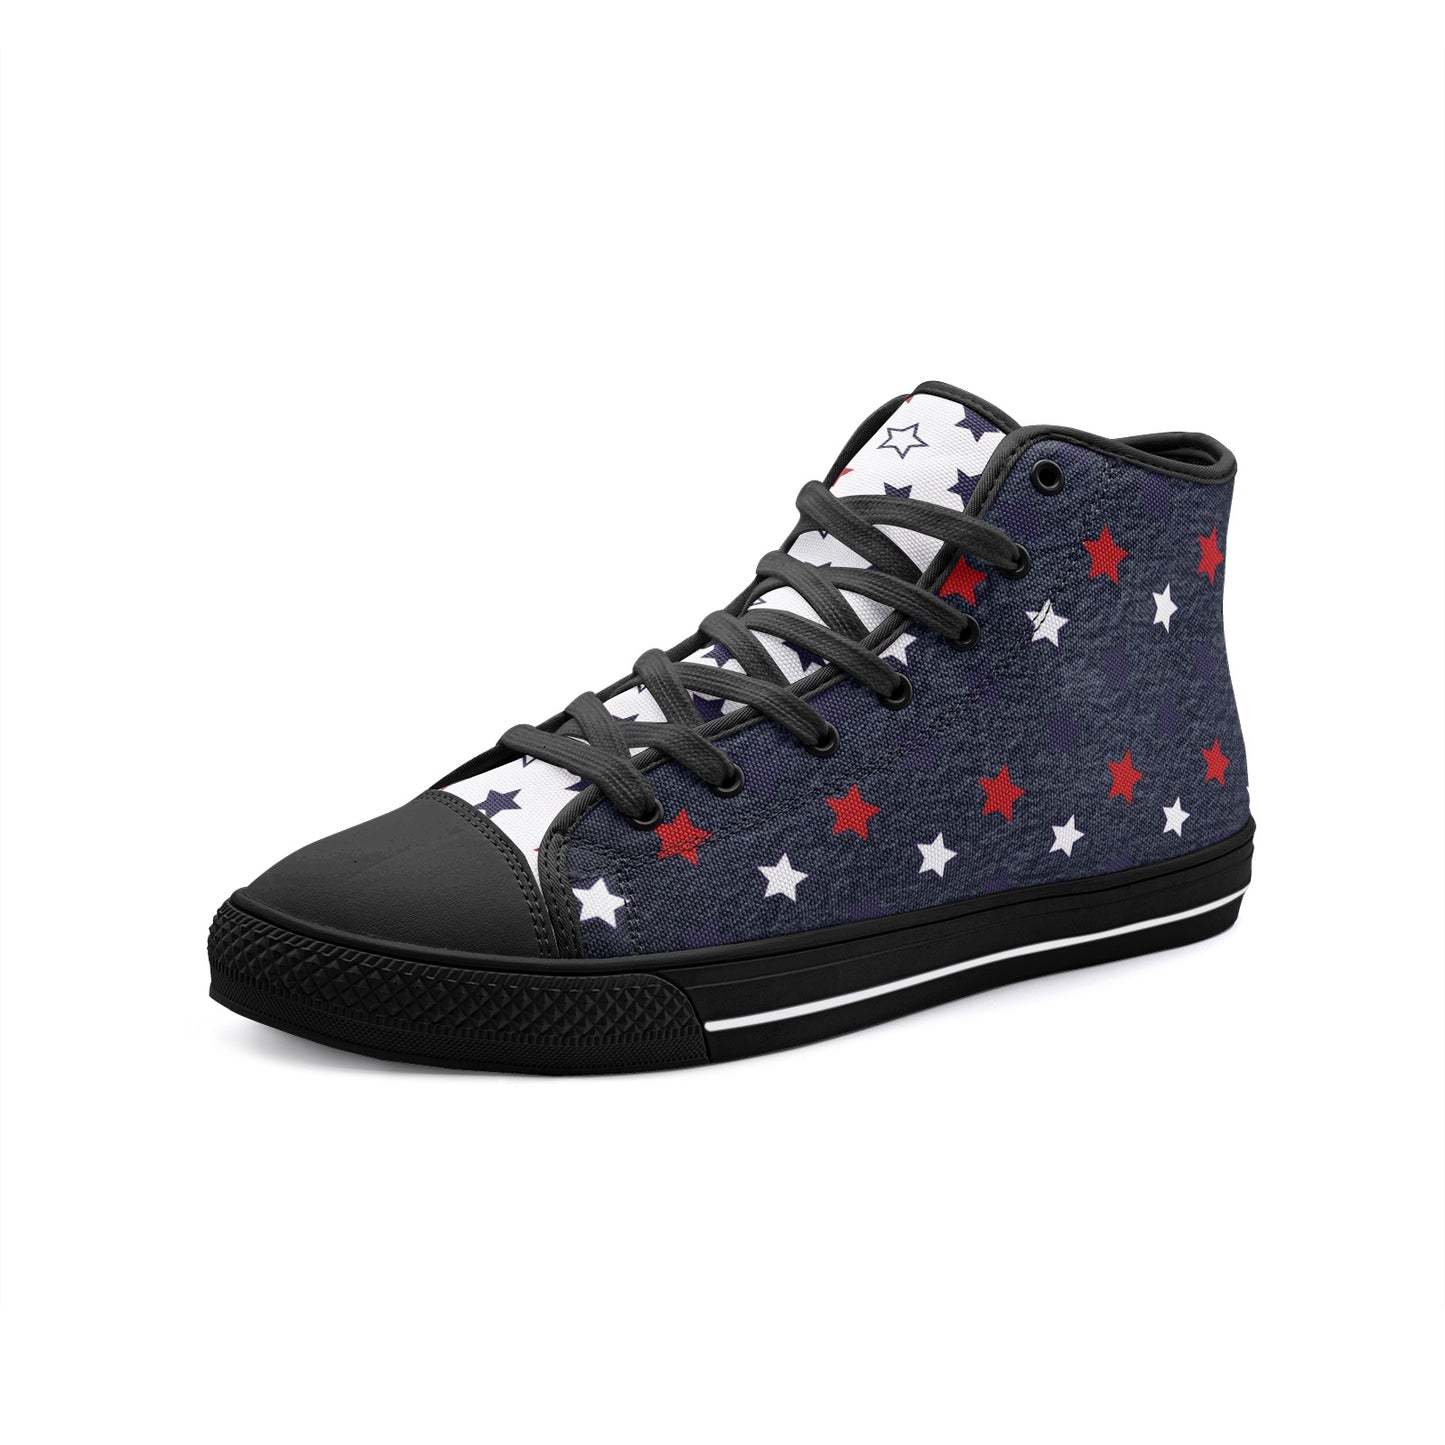 Unisex High Top Canvas Shoes Printy6